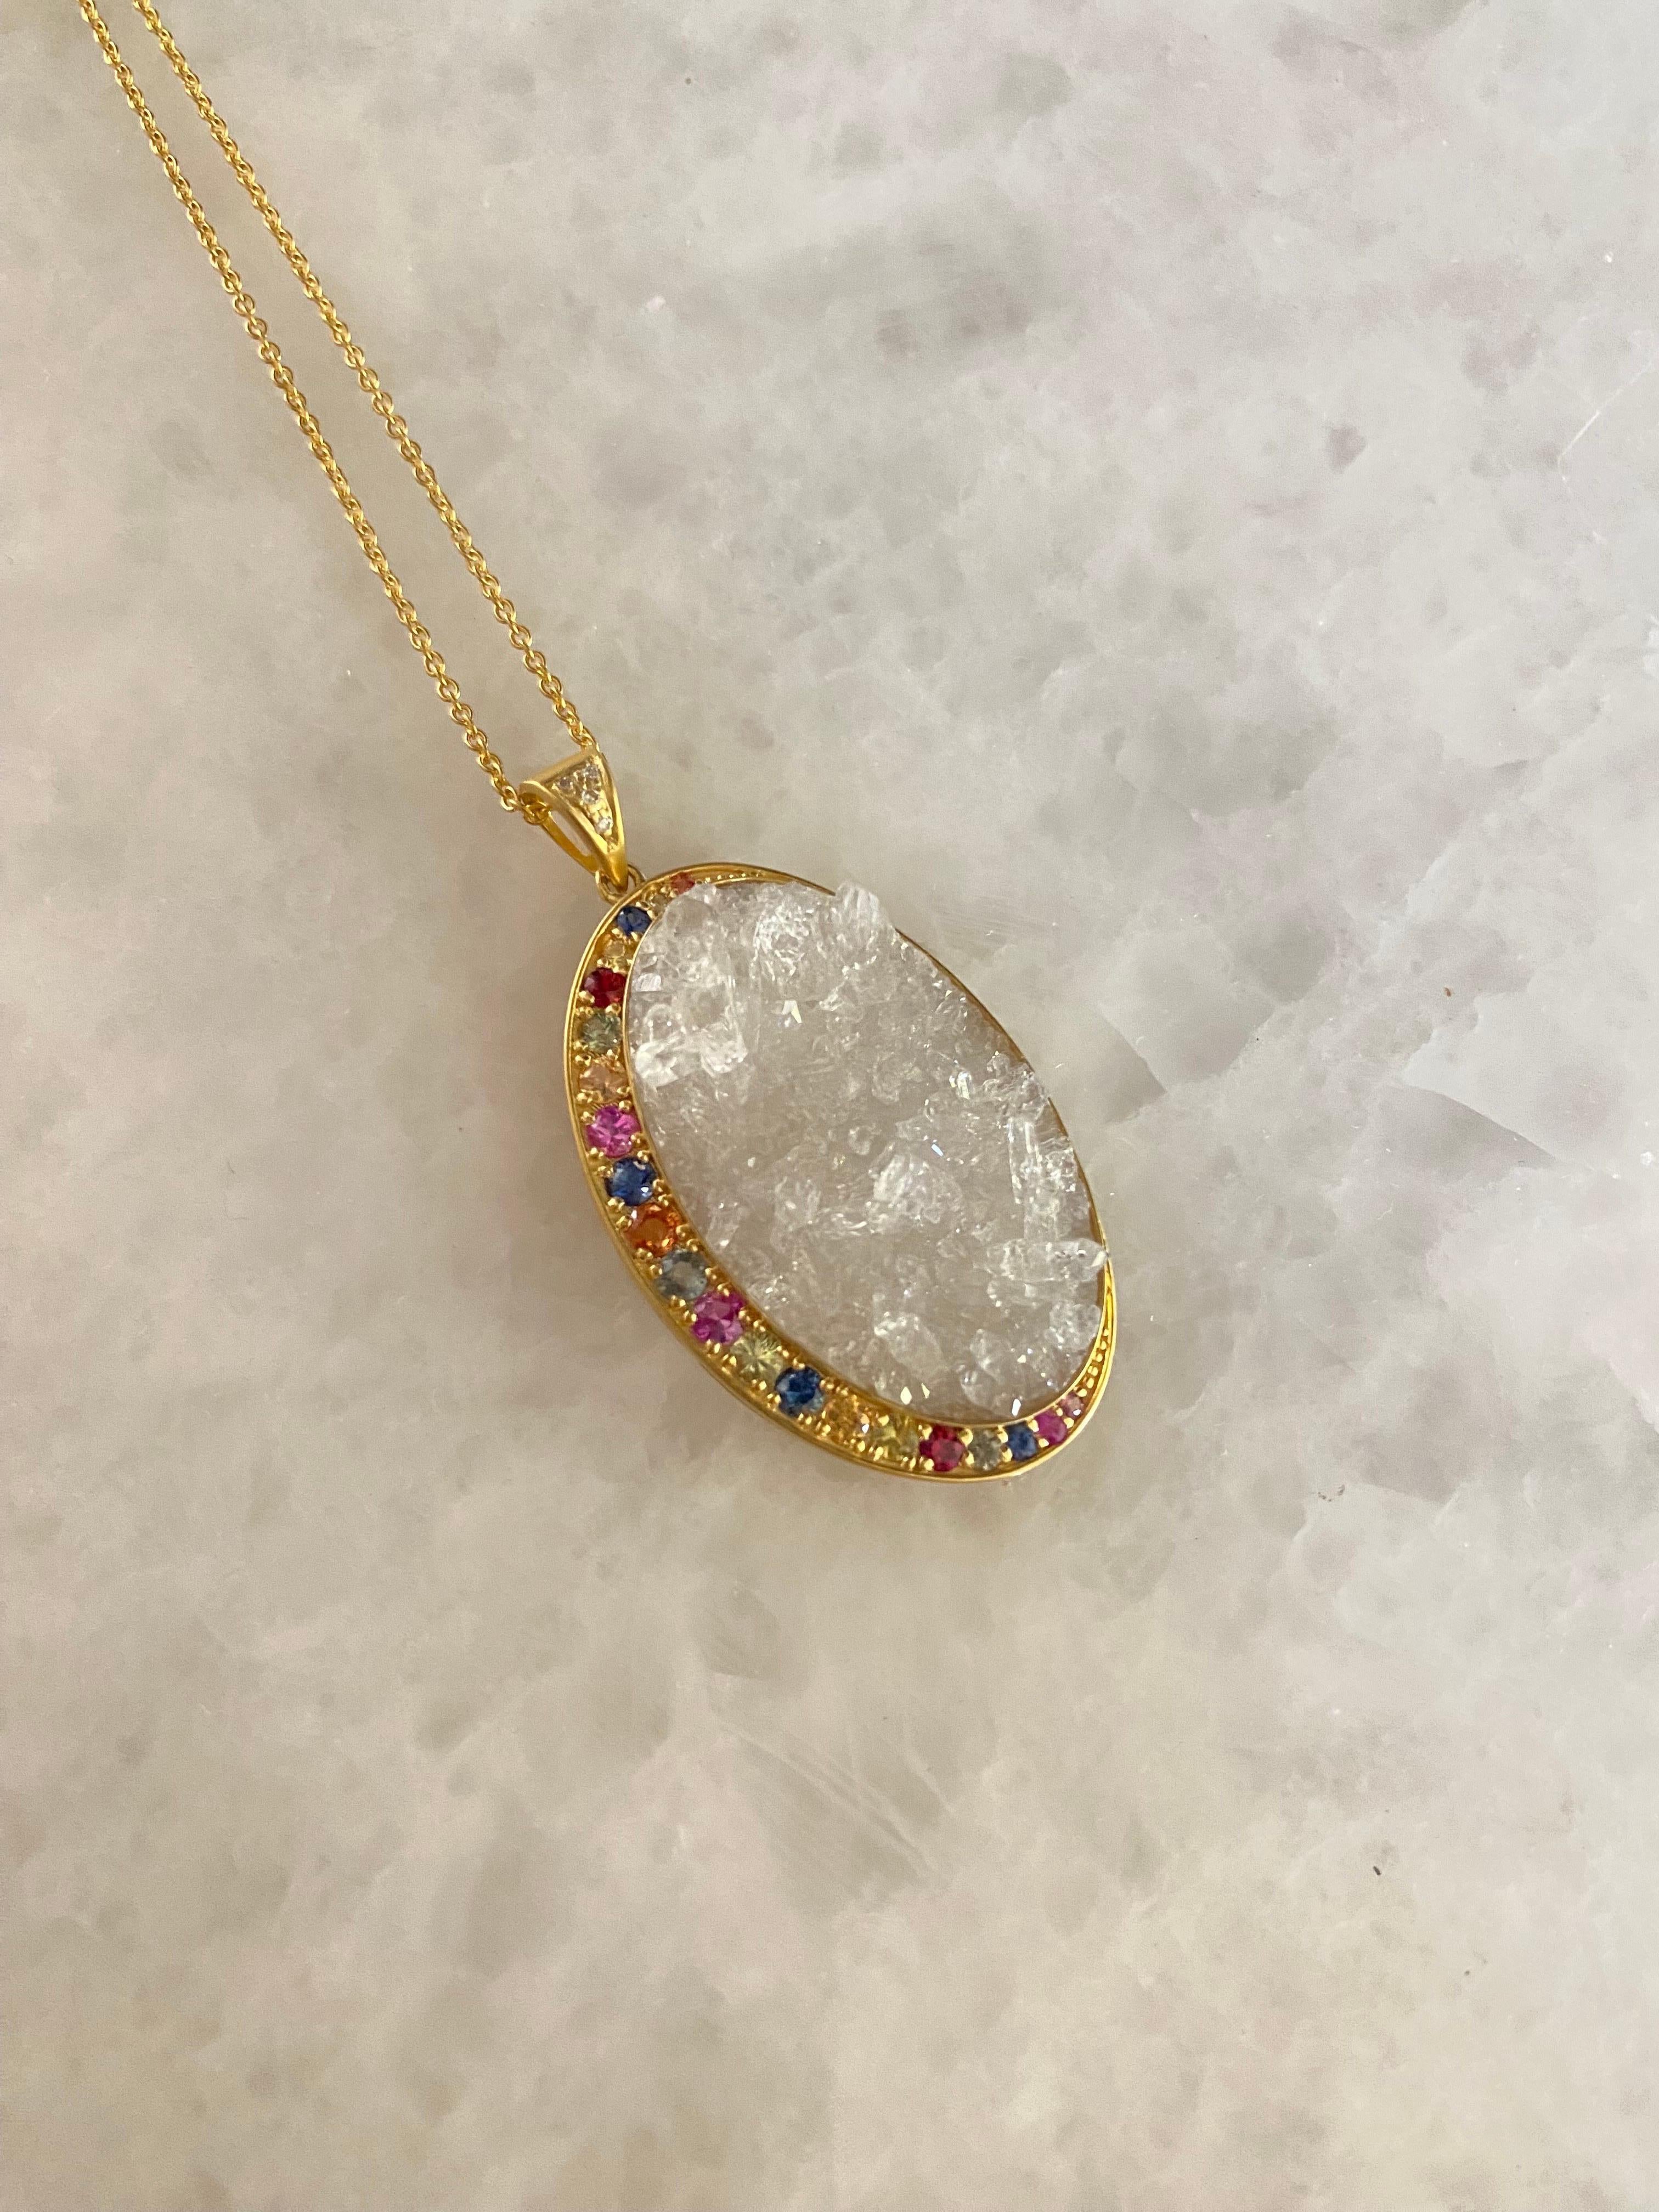 This stunning one of a kind Crystal Quartz center oval stone is three dimensional and incredibly eye catching. It is surrounded by a playful and colorful assortment of faceted round sapphires and is set in a custom warm tone alloy of 18kt gold.  The